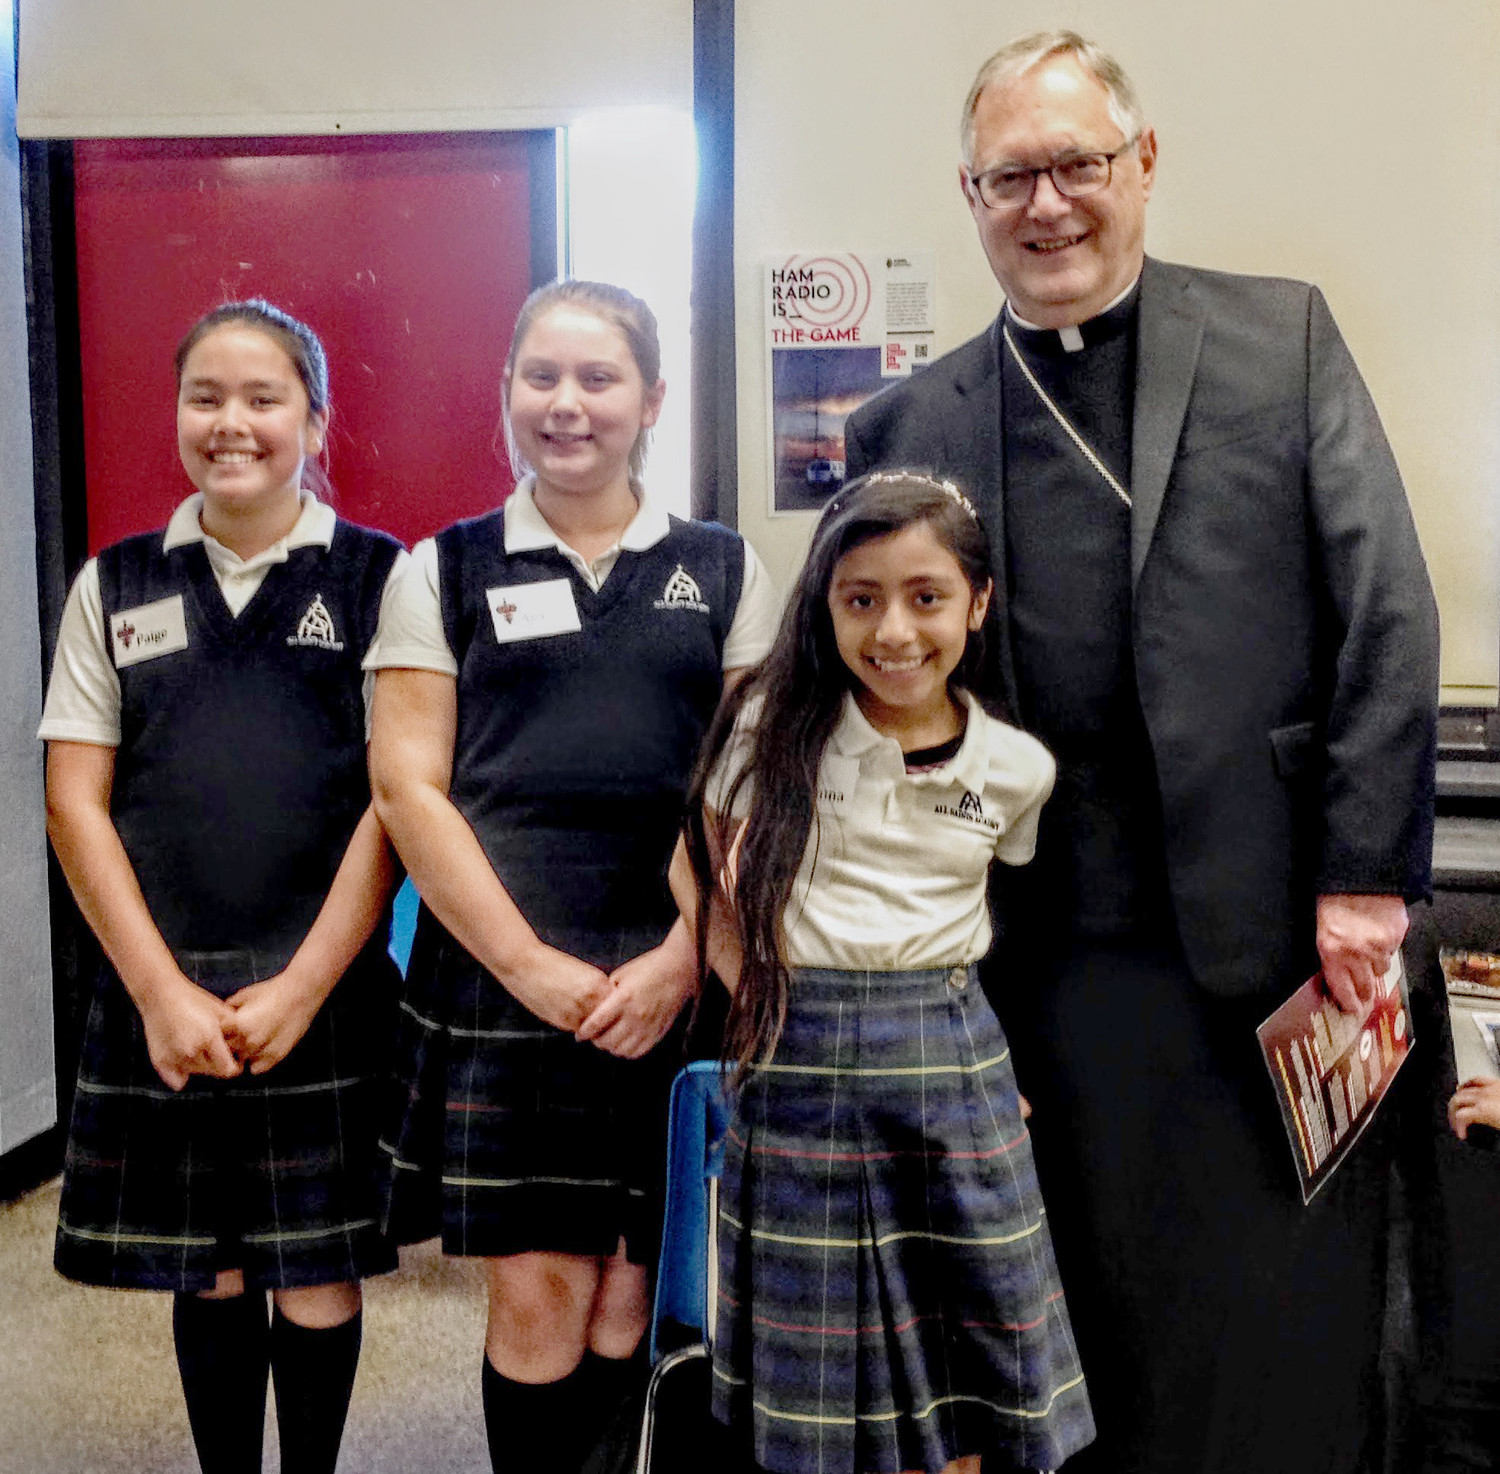 All Saints students Paige, Ava and Arianna with Bishop Tobin following his successful radio contact with a North Kingstown station.